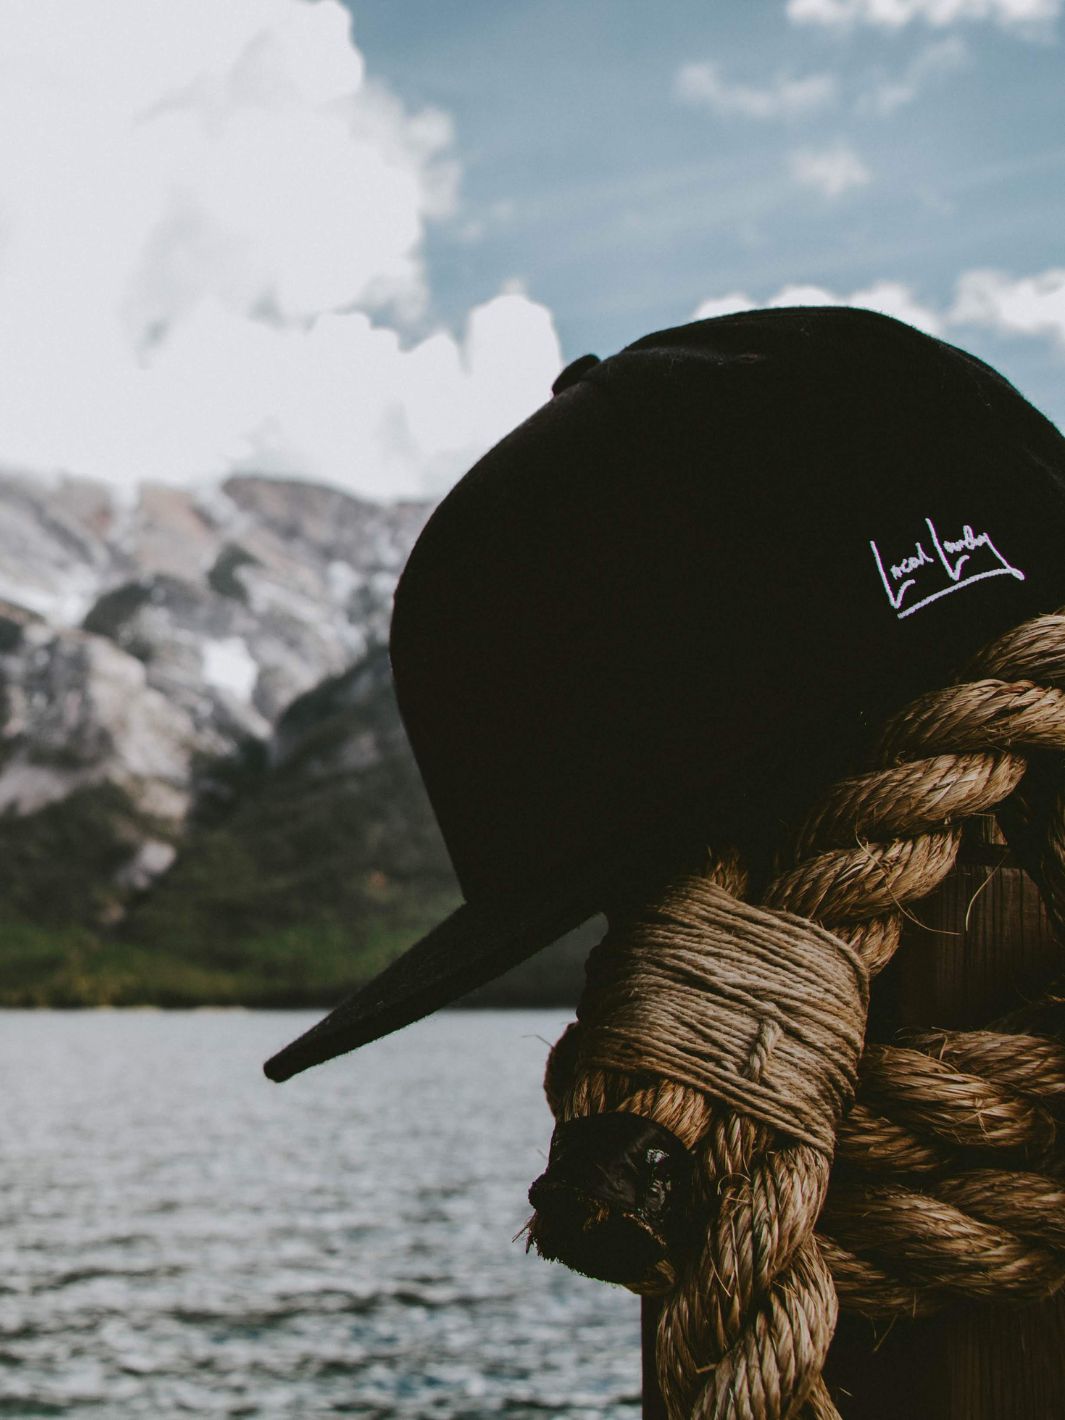 Local Laundry Rundle Snapback hat in black resting atop a bundle of rope in the mountains. This hat is made in Vancouver, Canada.